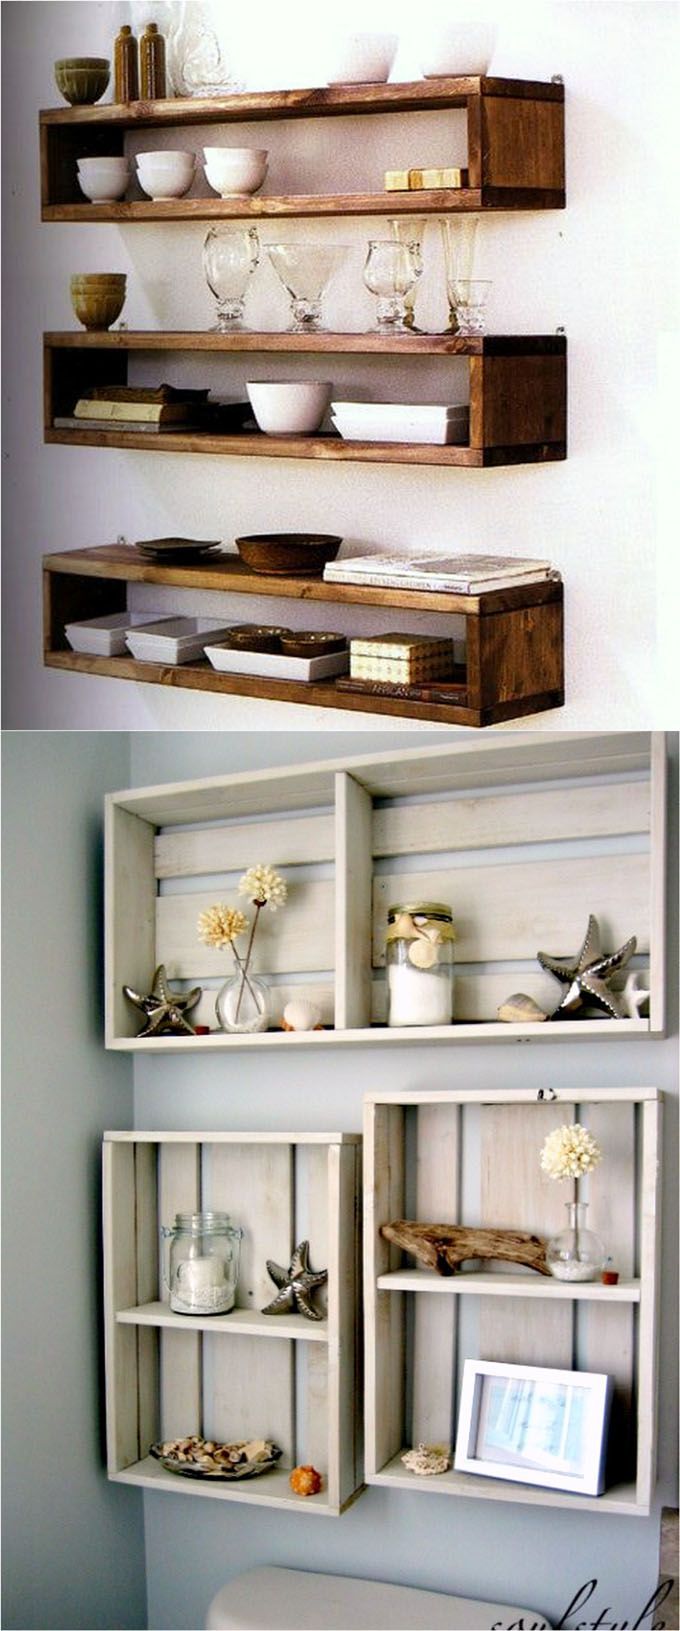 16 easy tutorials on building beautiful floating shelves and wall shelves! Check o